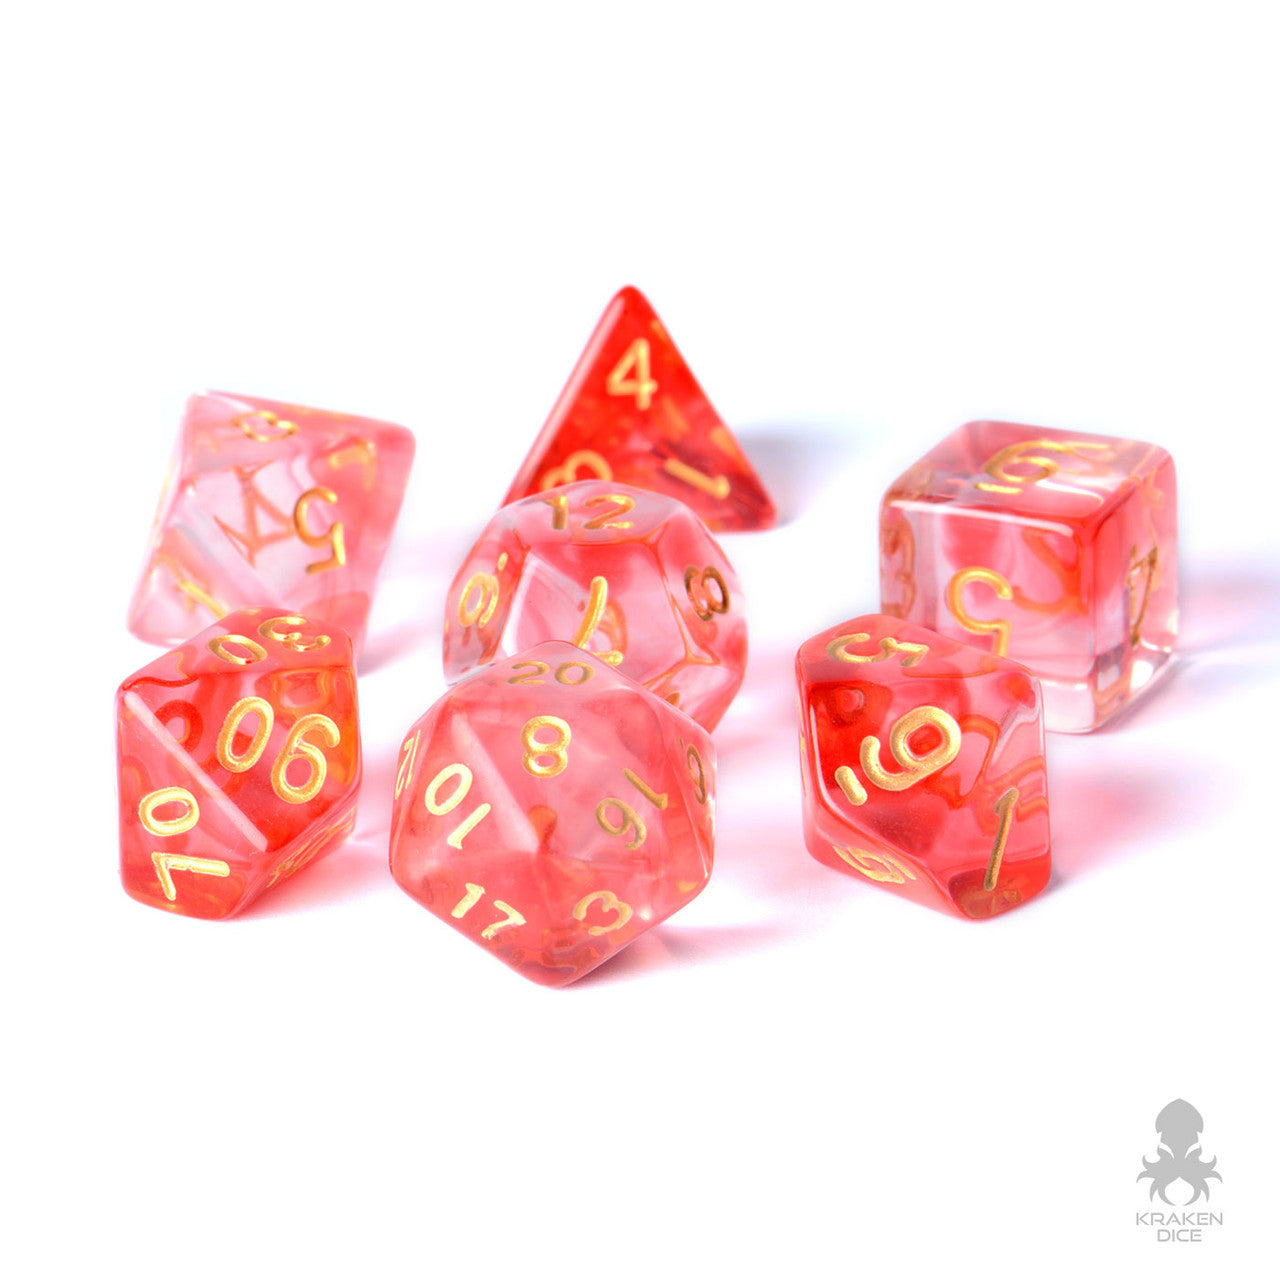 Sanguine Fog Translucent 7pc Dice Set With Red Swirls and Gold Ink